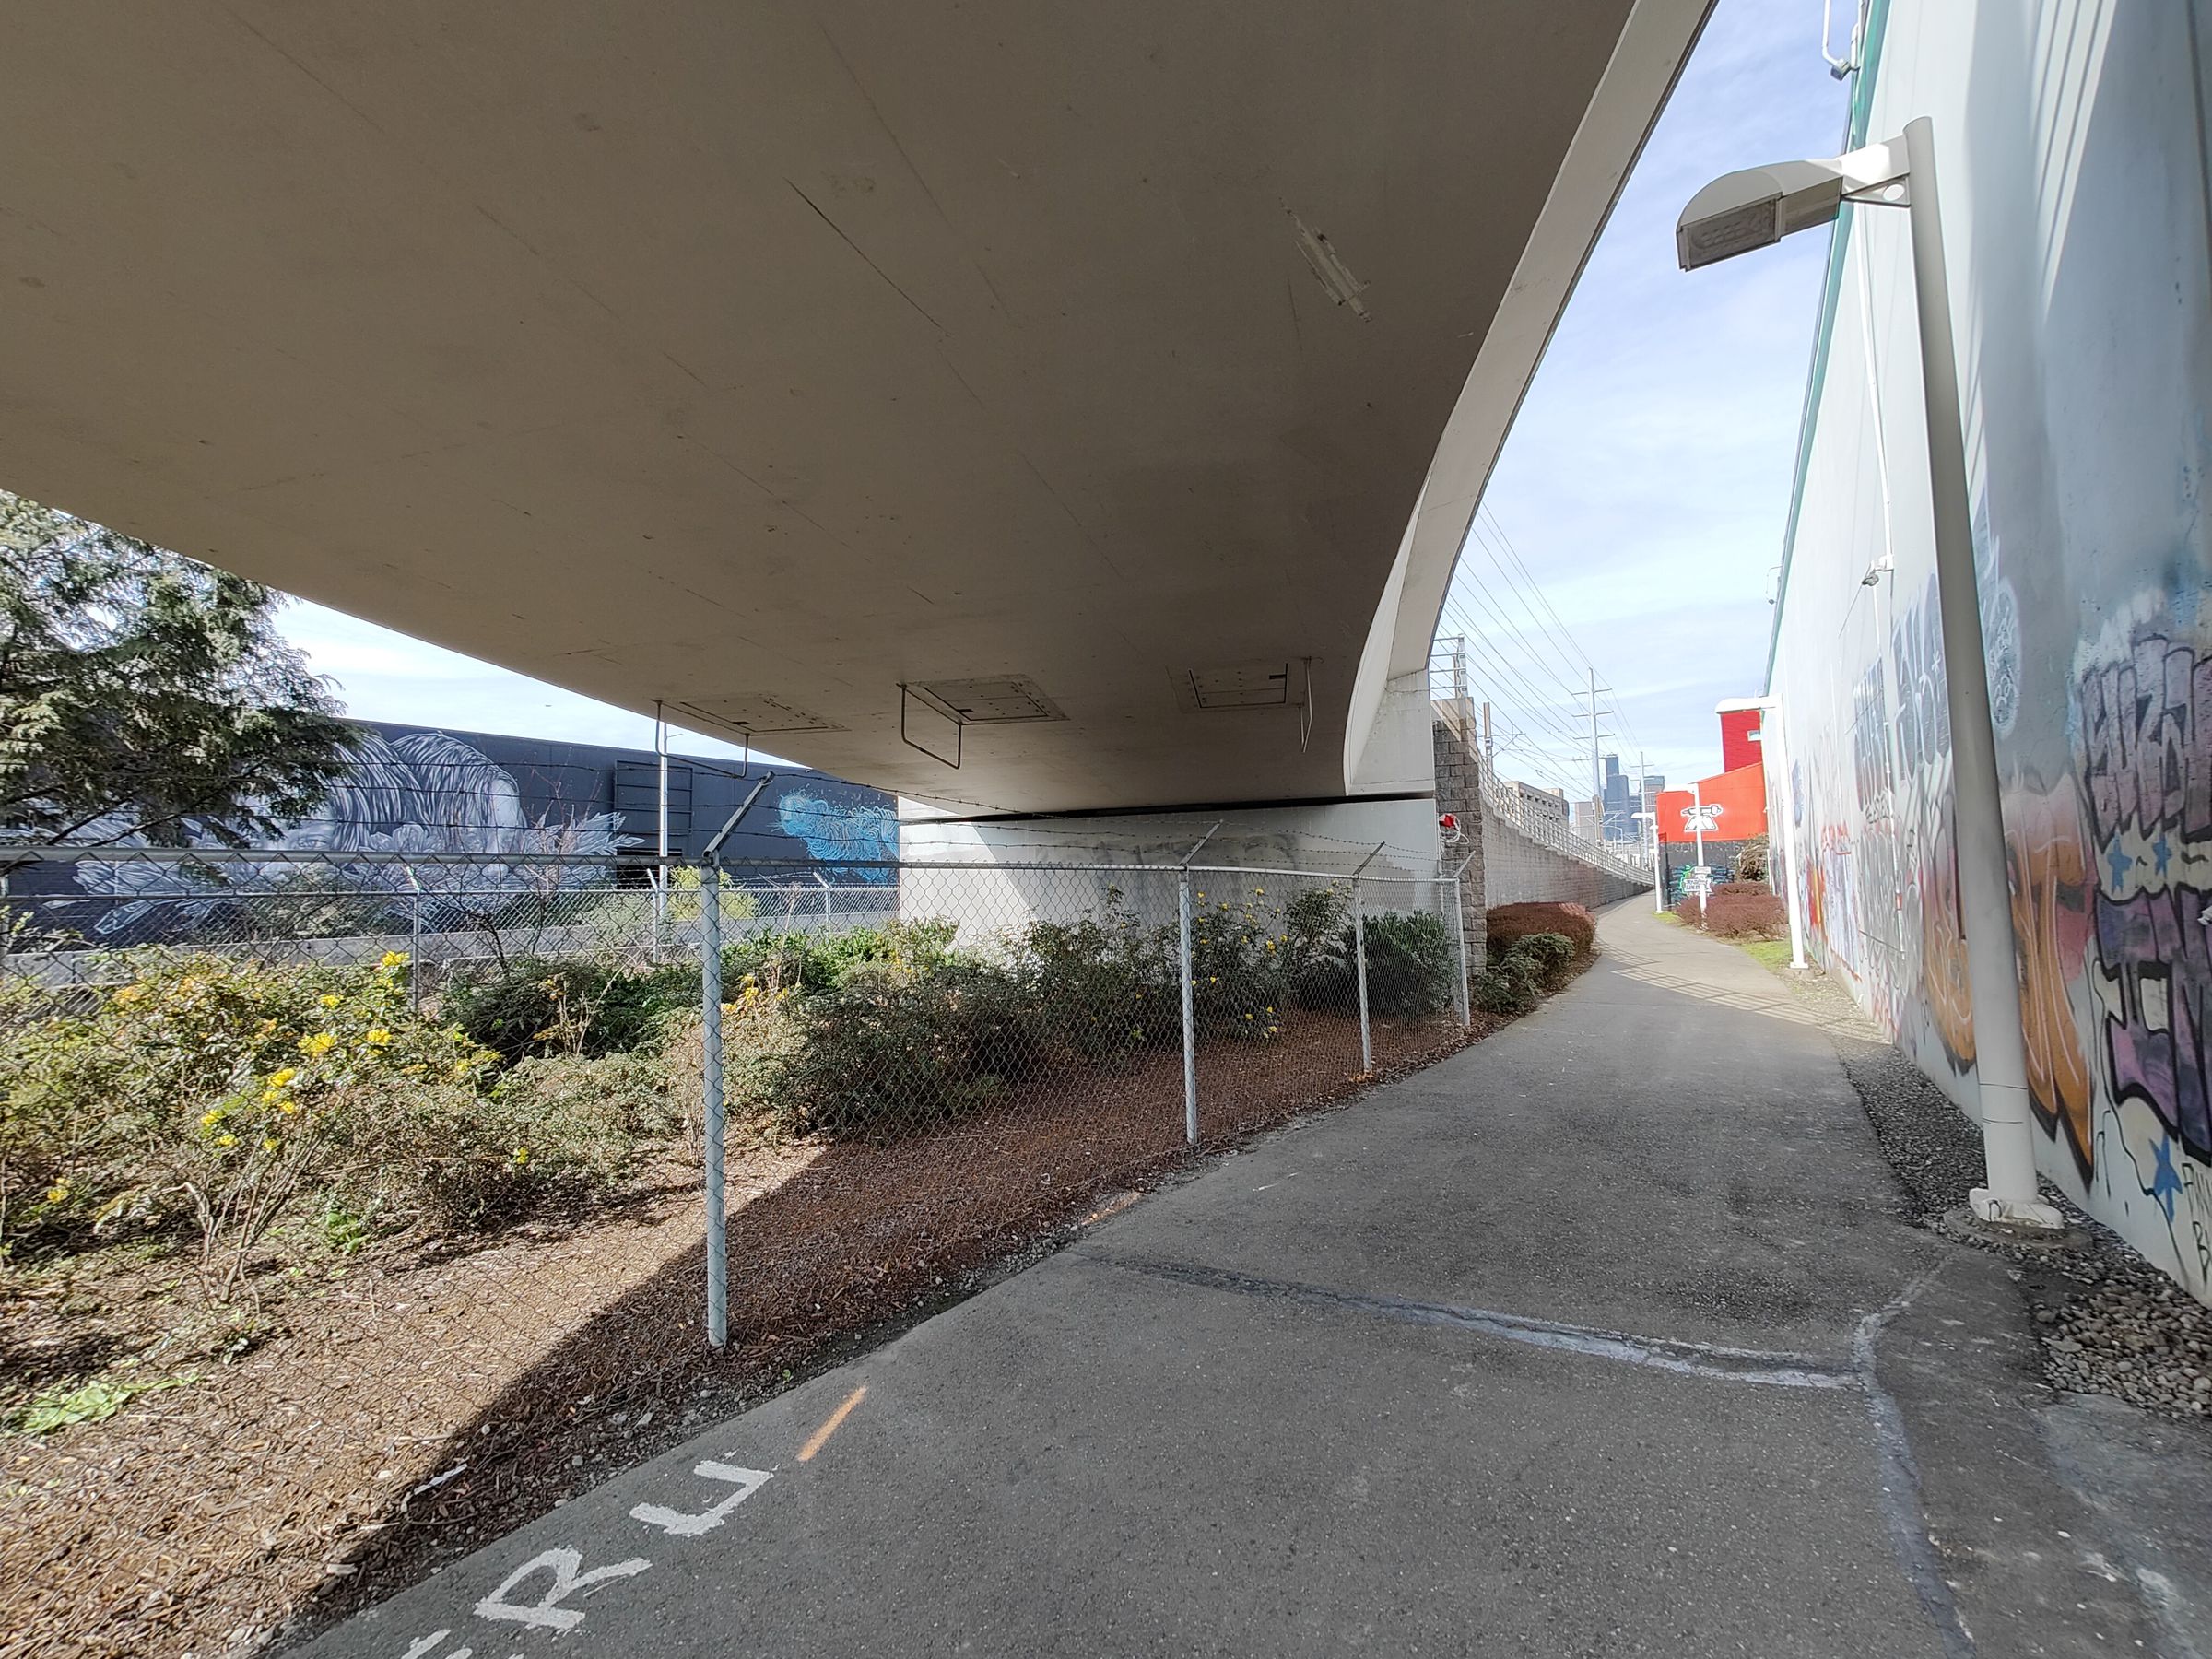 View of a path with bridge overhead and graffiti tagged wall to the right.